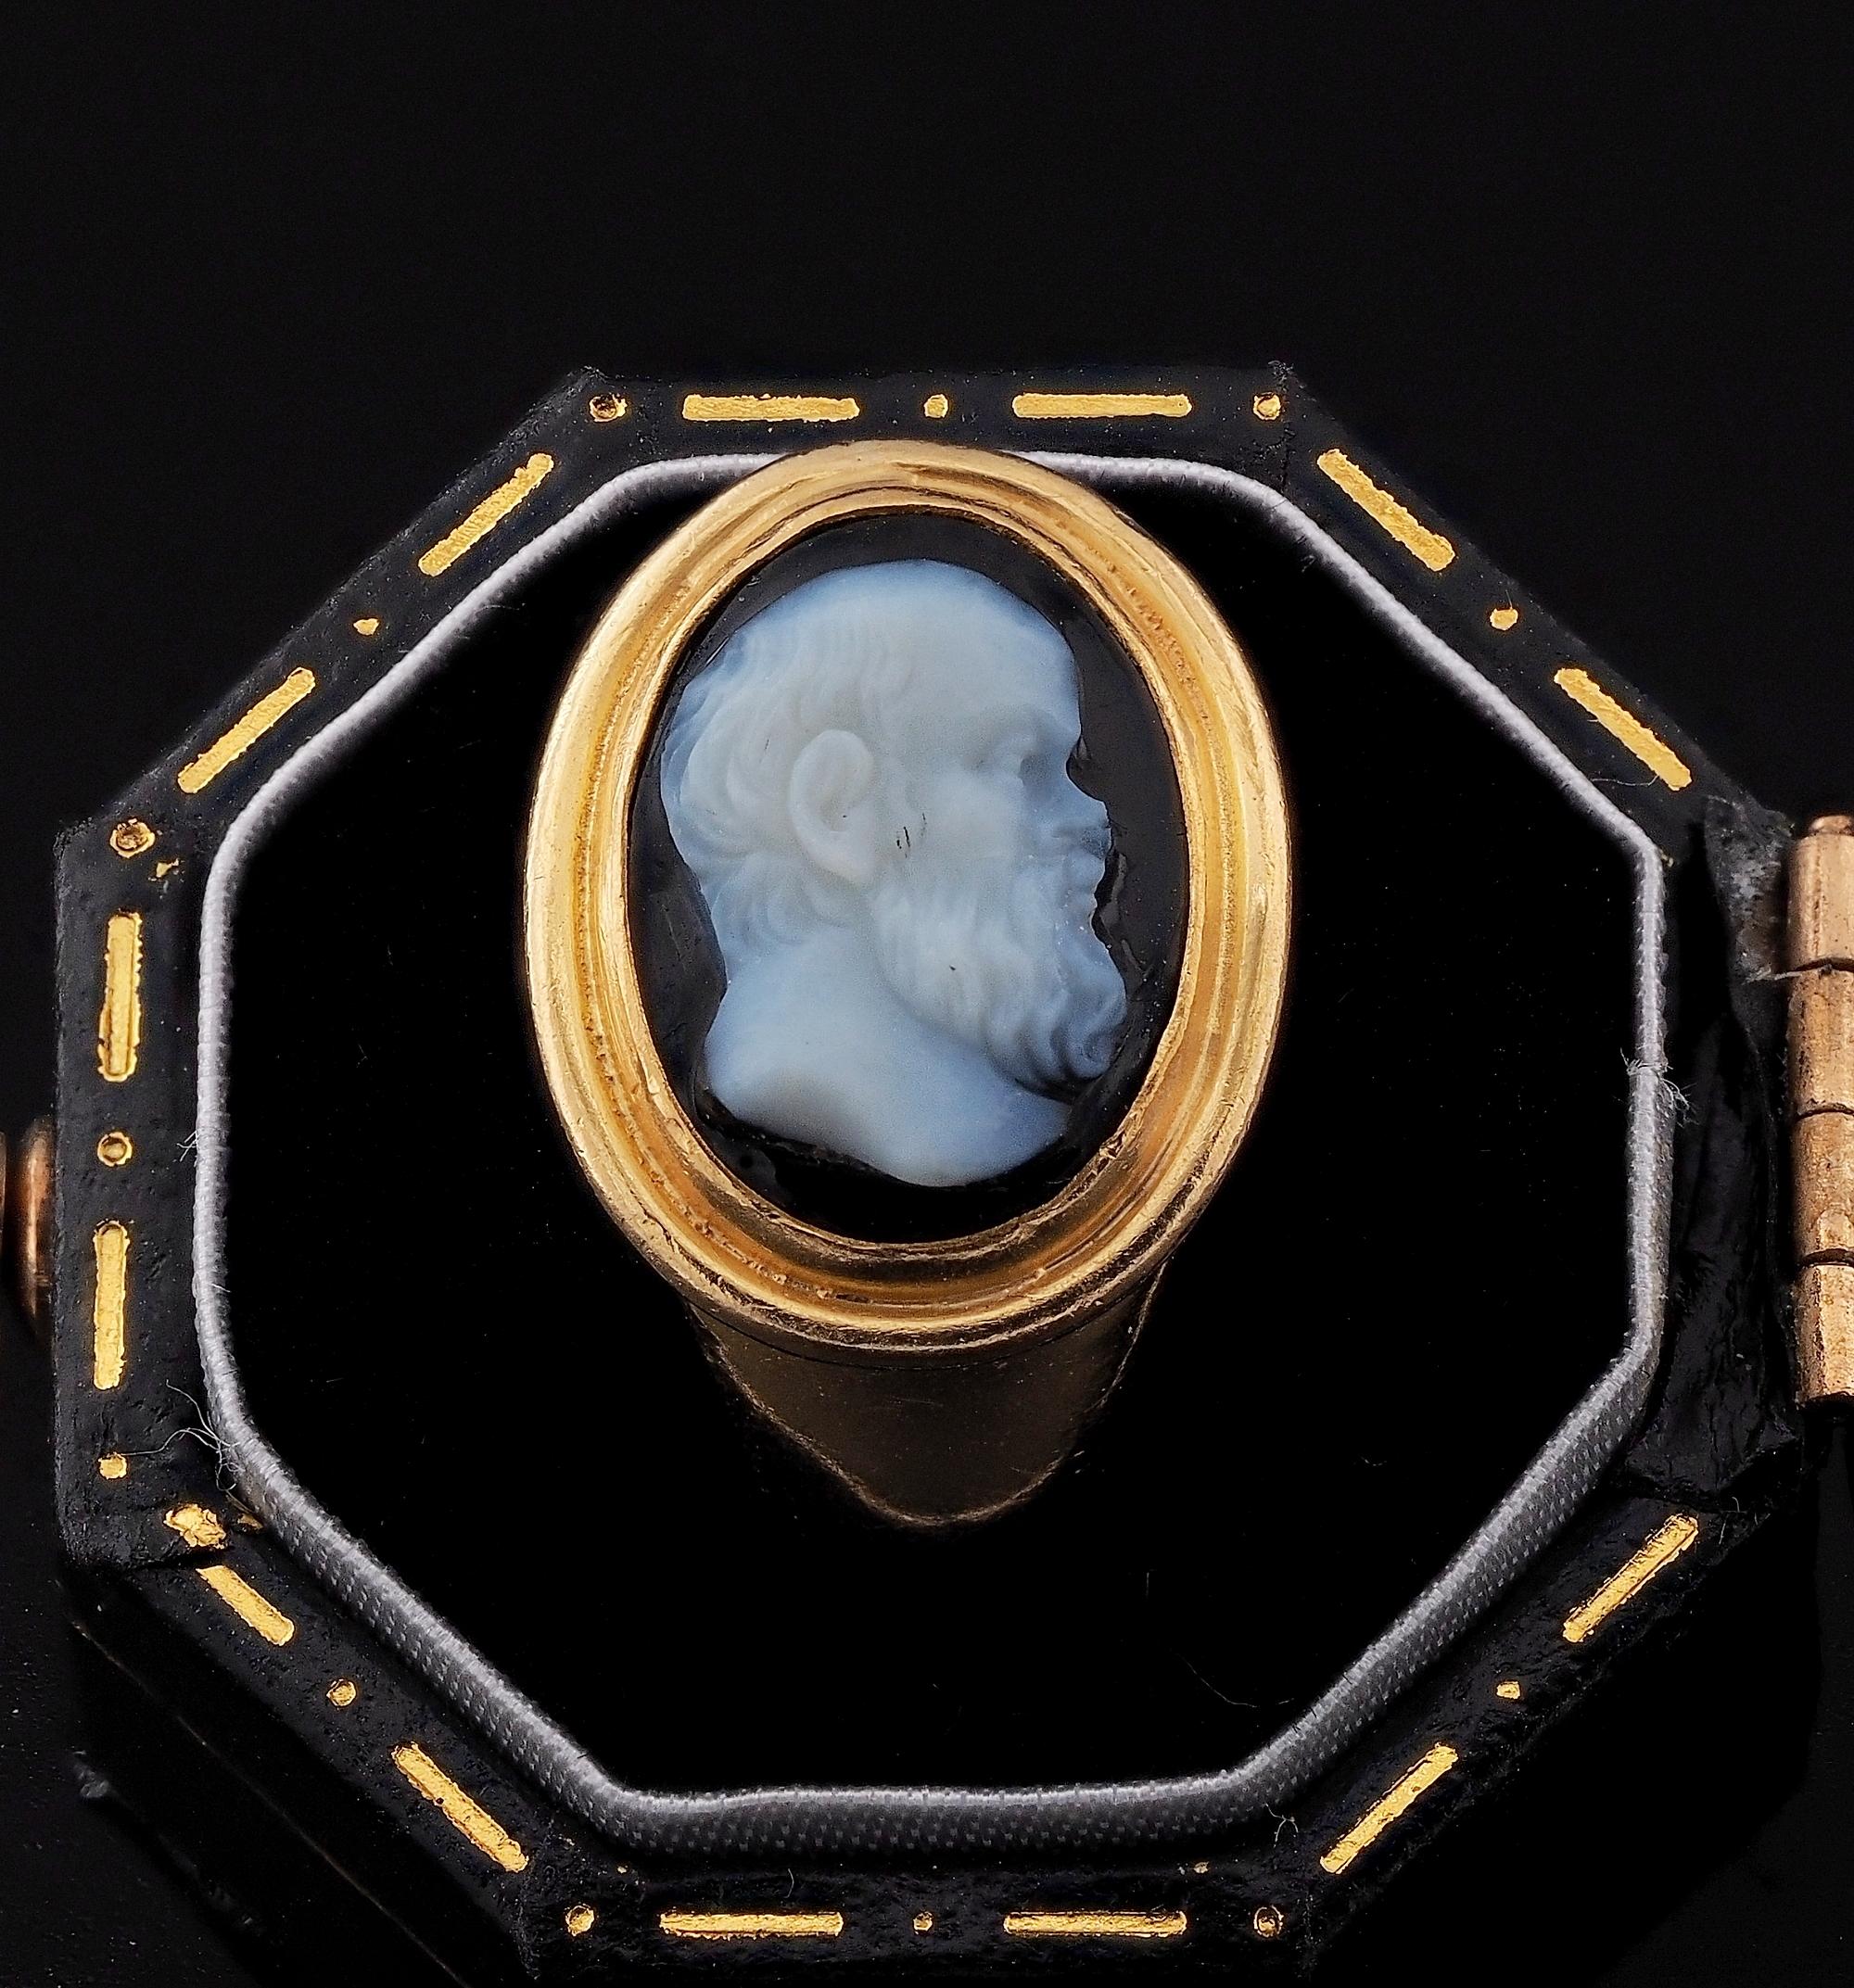 Ancient Cameo Art
A beautiful Georgian period ring hand crafted of solid 18 KT gold
Featuring a face right profile of Socrate skilfully carved from Agate, cameo possibly older than Georgian, the ring is 1800/ 1820 ca
Cameo is 12.6 x 9.1 mm ring’s